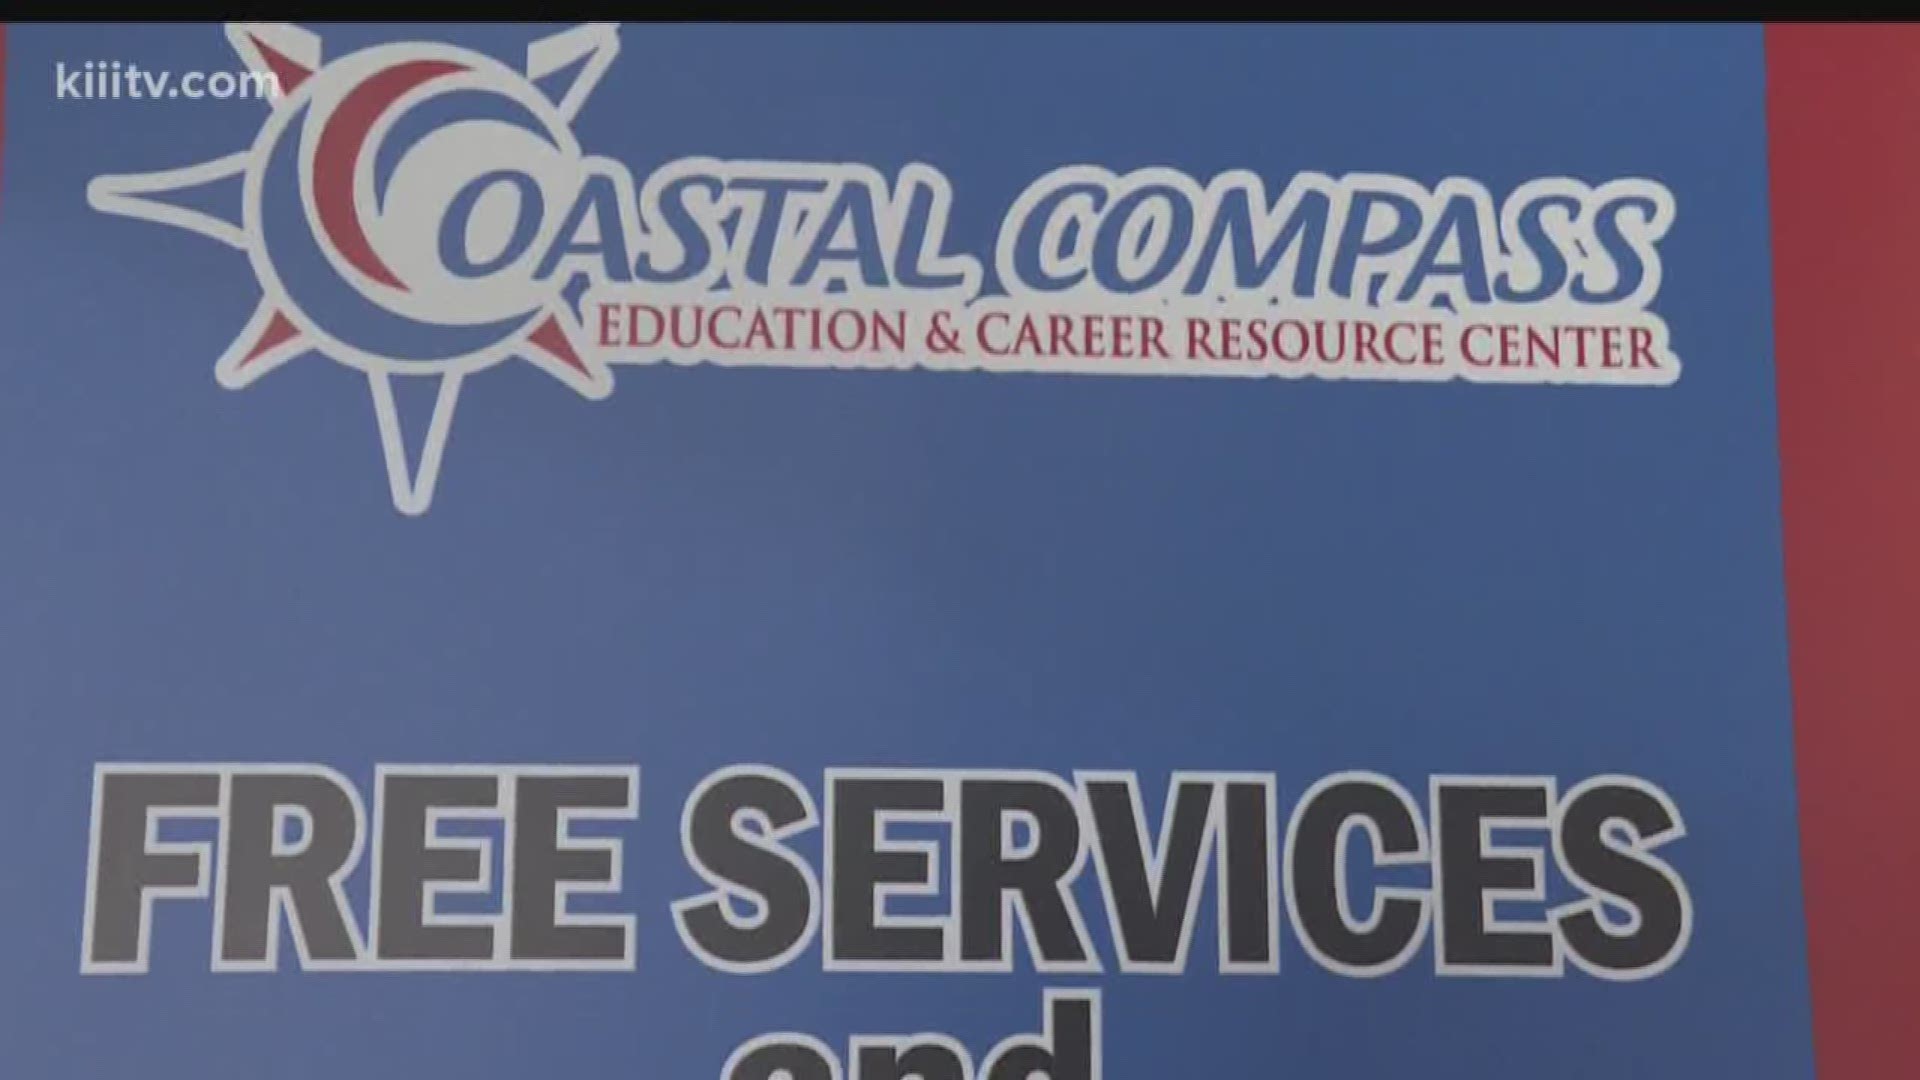 Coastal Compass is now better equipped to help those it serves now that it has partnered with Goodwill.